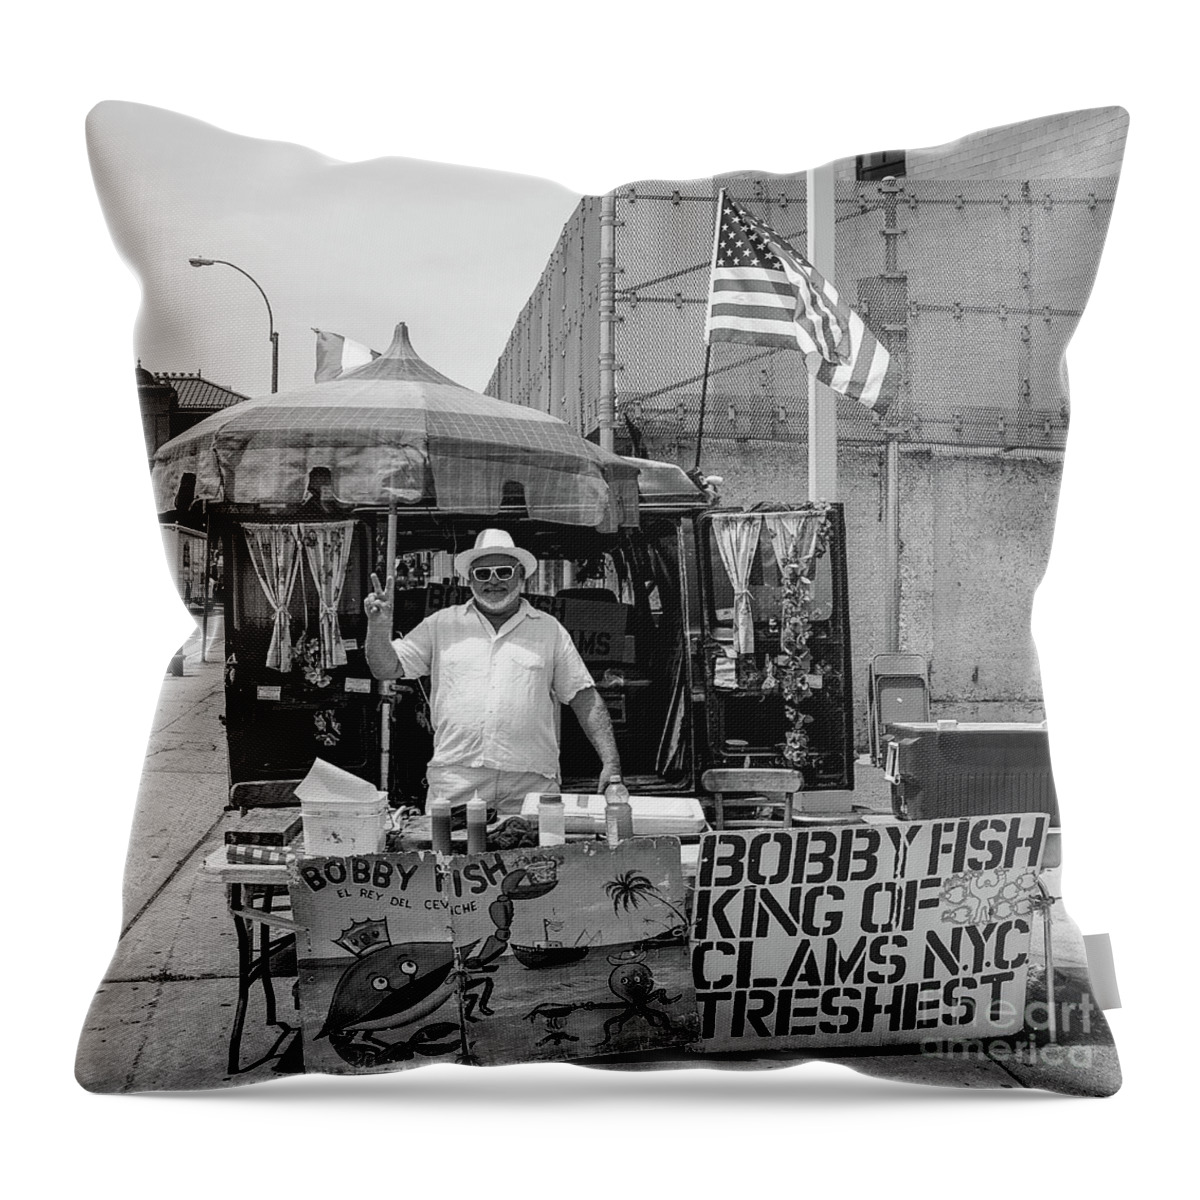 Bobby Fish Throw Pillow featuring the photograph Bobby Fish by Cole Thompson